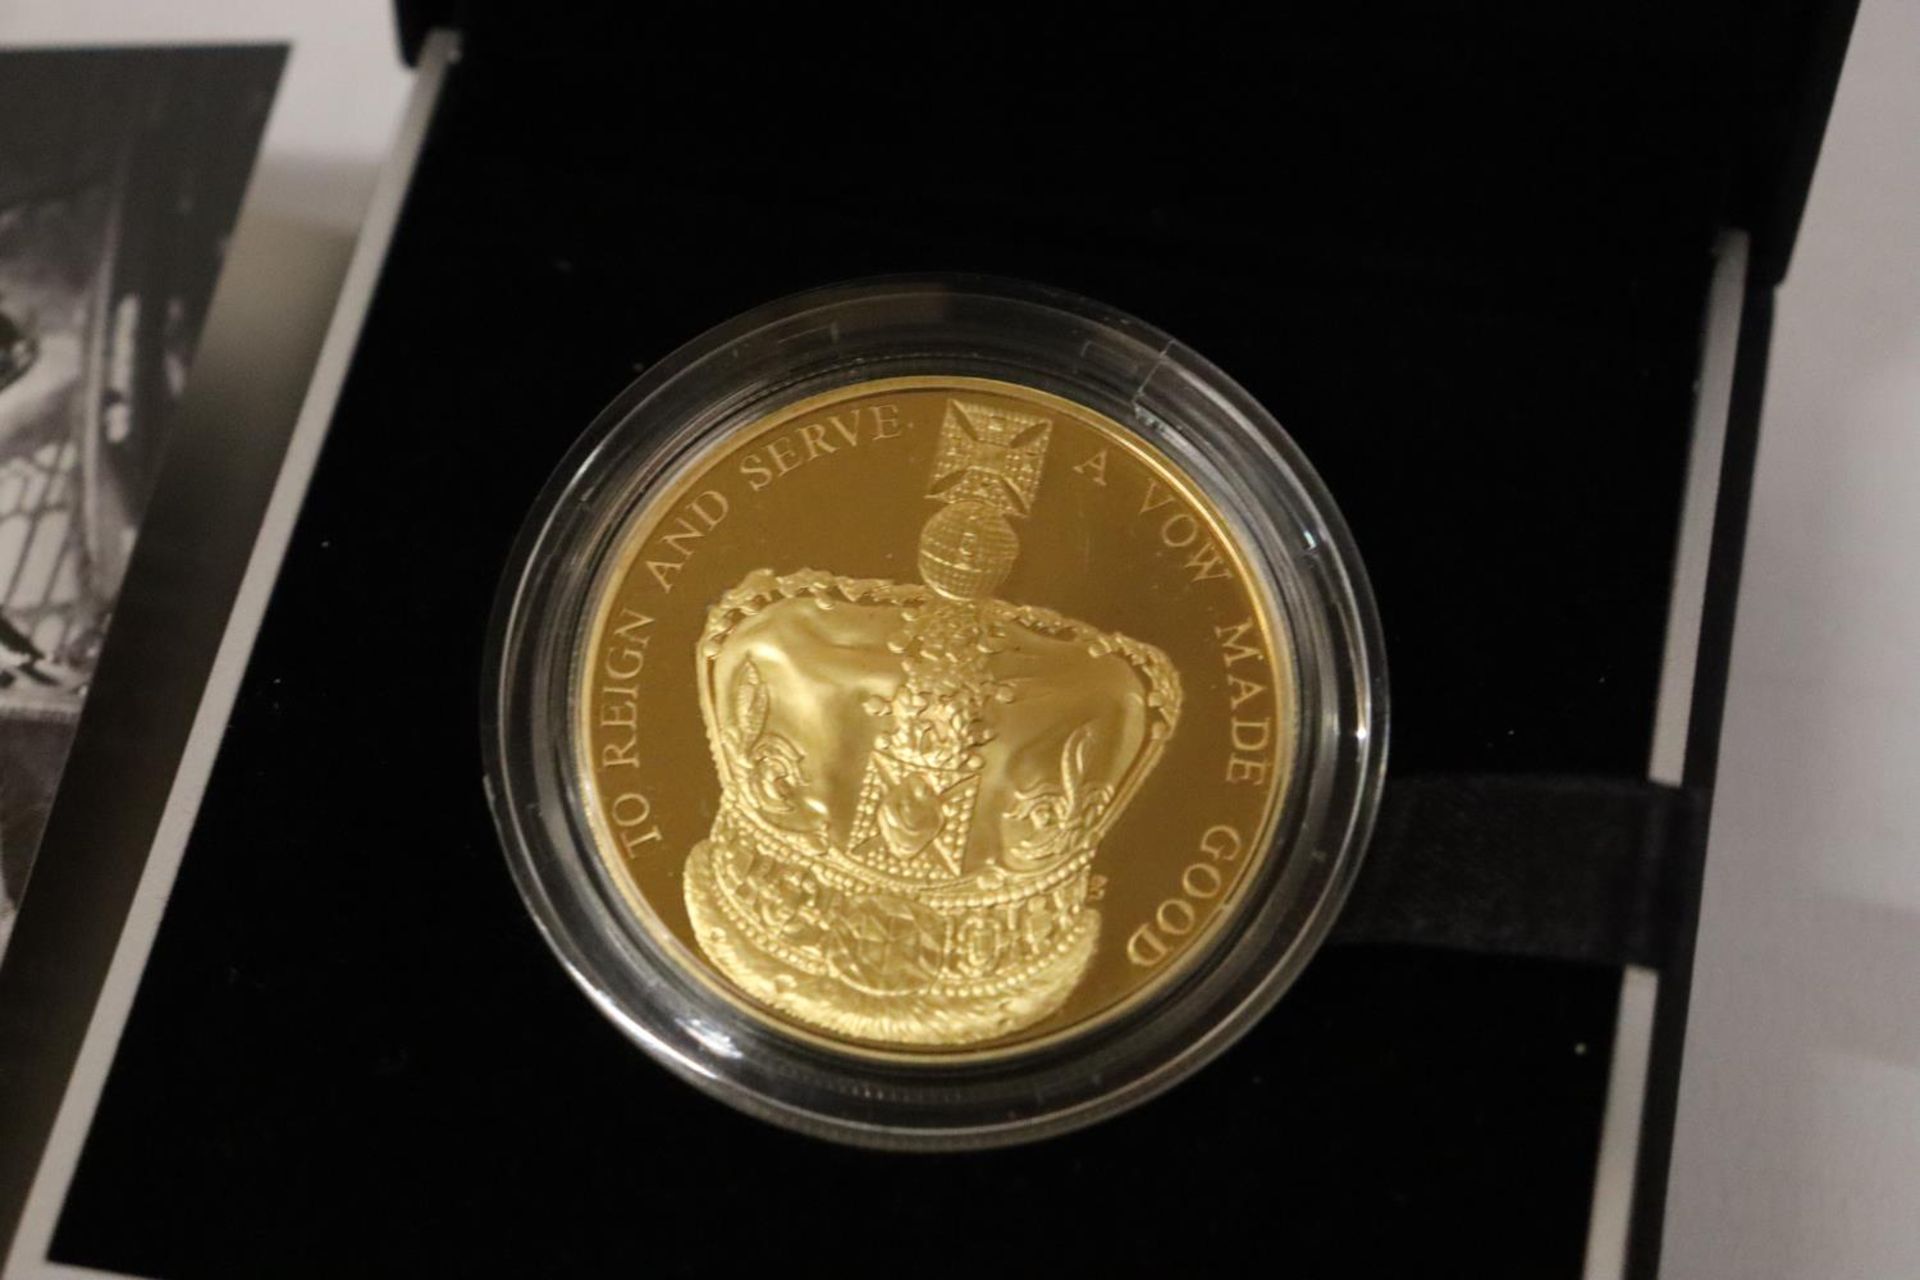 THE ROYAL MINT 2013 .925 AG PLATED WITH FINE GOLD . WEIGHT IS 28.28 GRMS THE 60TH ANNIVERSARY OF THE - Bild 2 aus 5